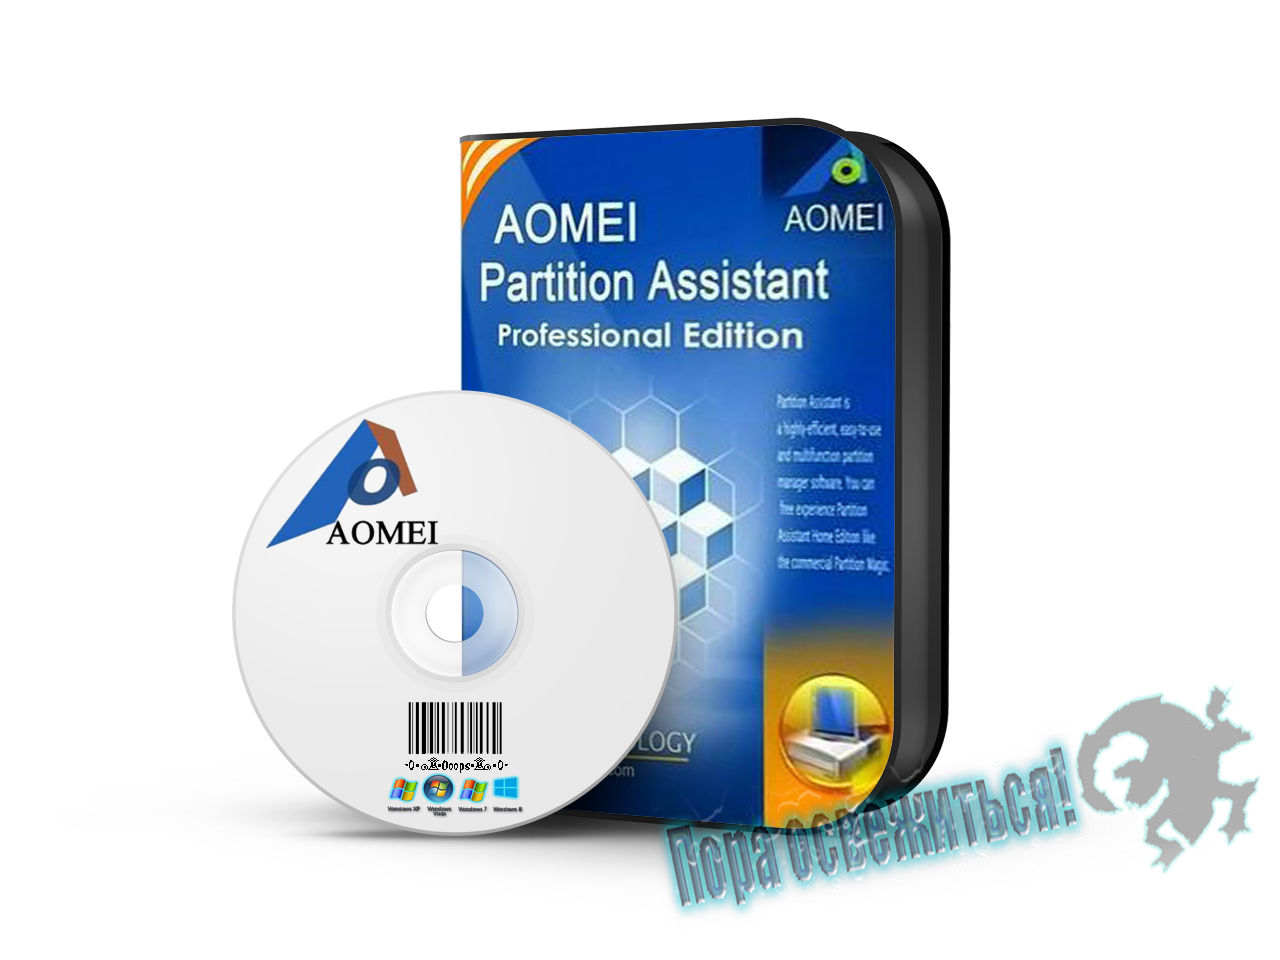 aomei partition assistant server edition full